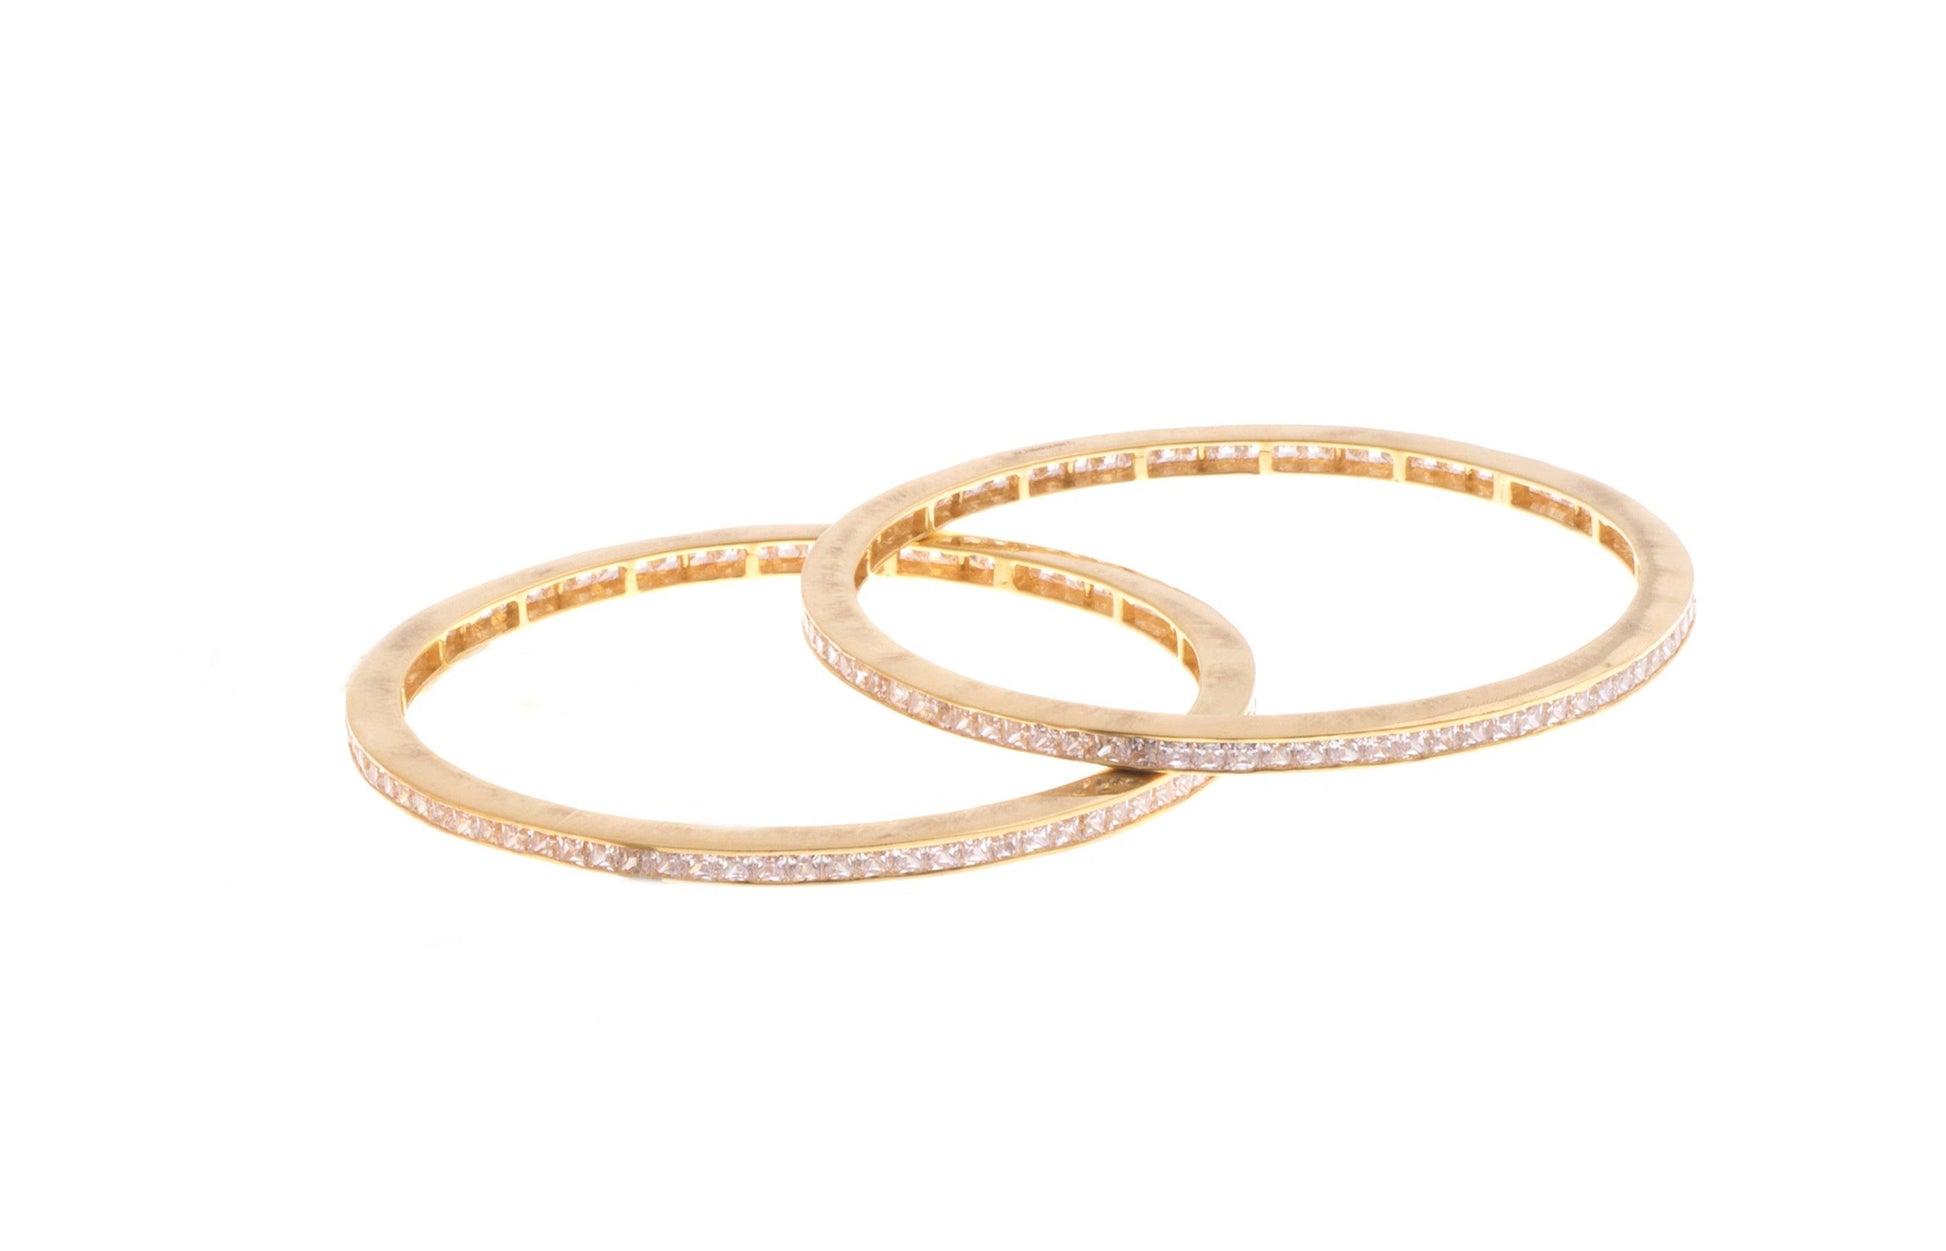 Stone Set 22ct Gold and Cubic Zirconia Bangles (B-1555) - Pair